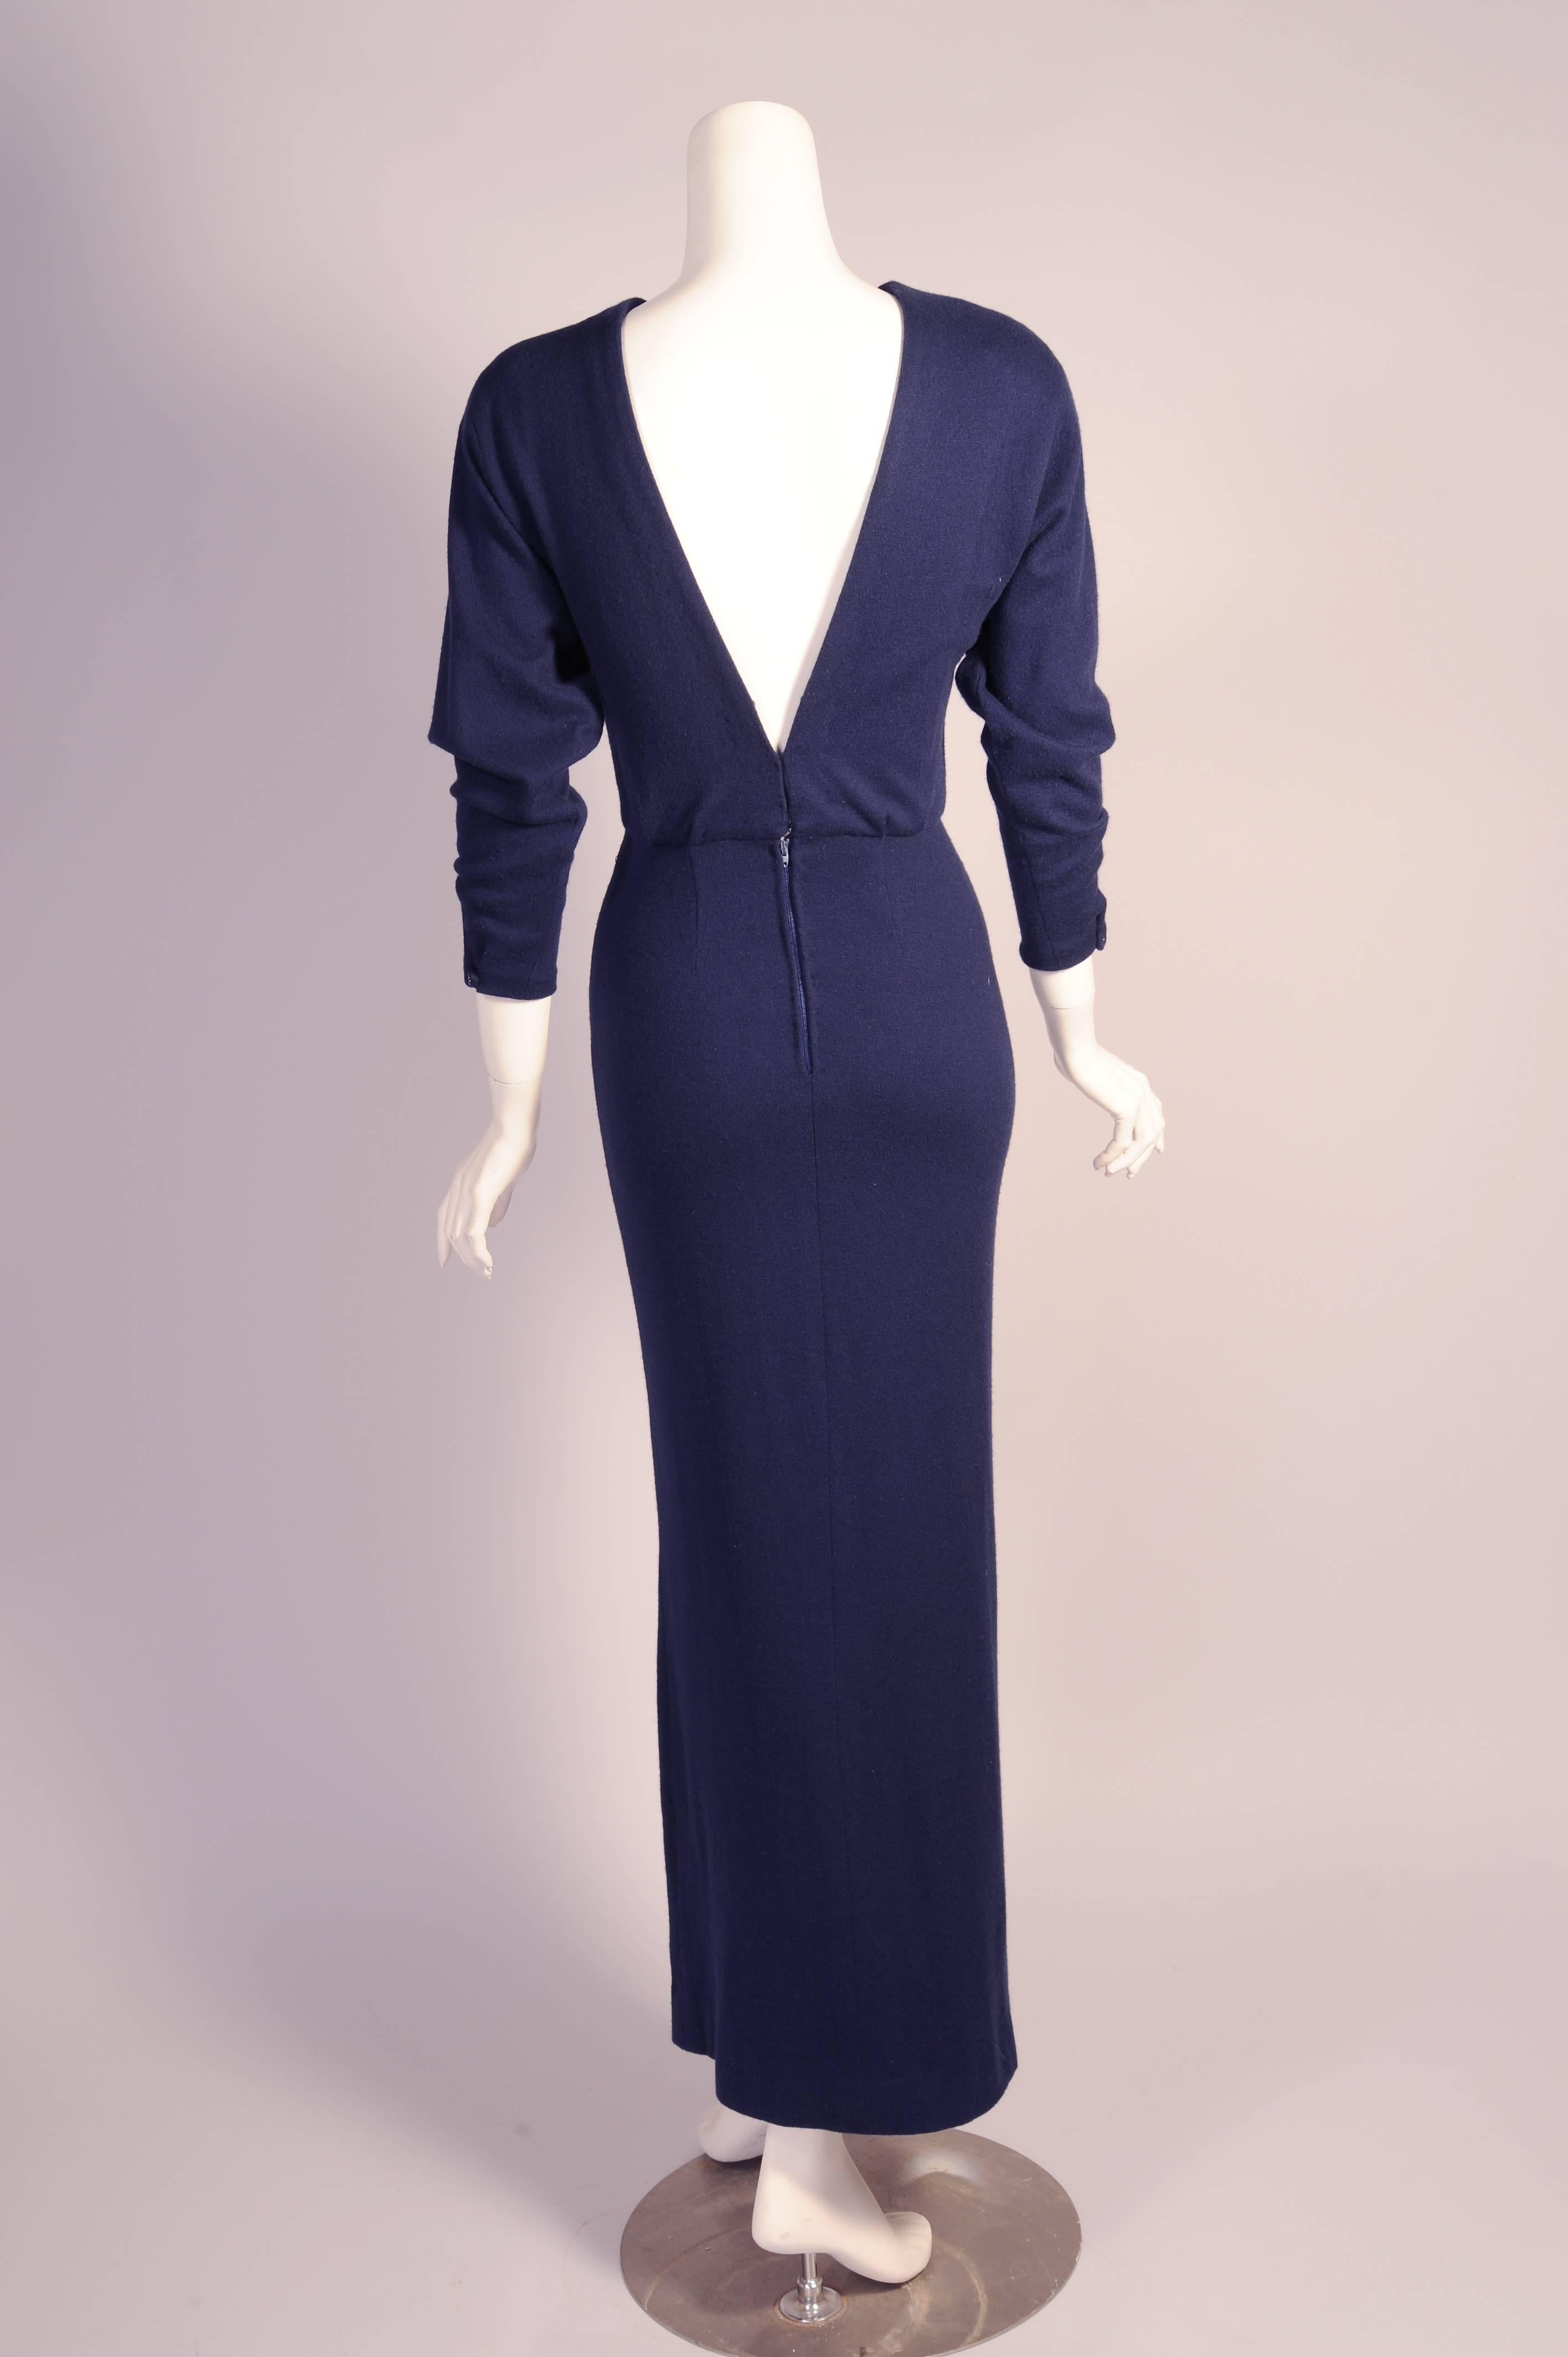 Women's 1970's Navy Blue Cashmere Bare Back Evening Dress attributed to Halston